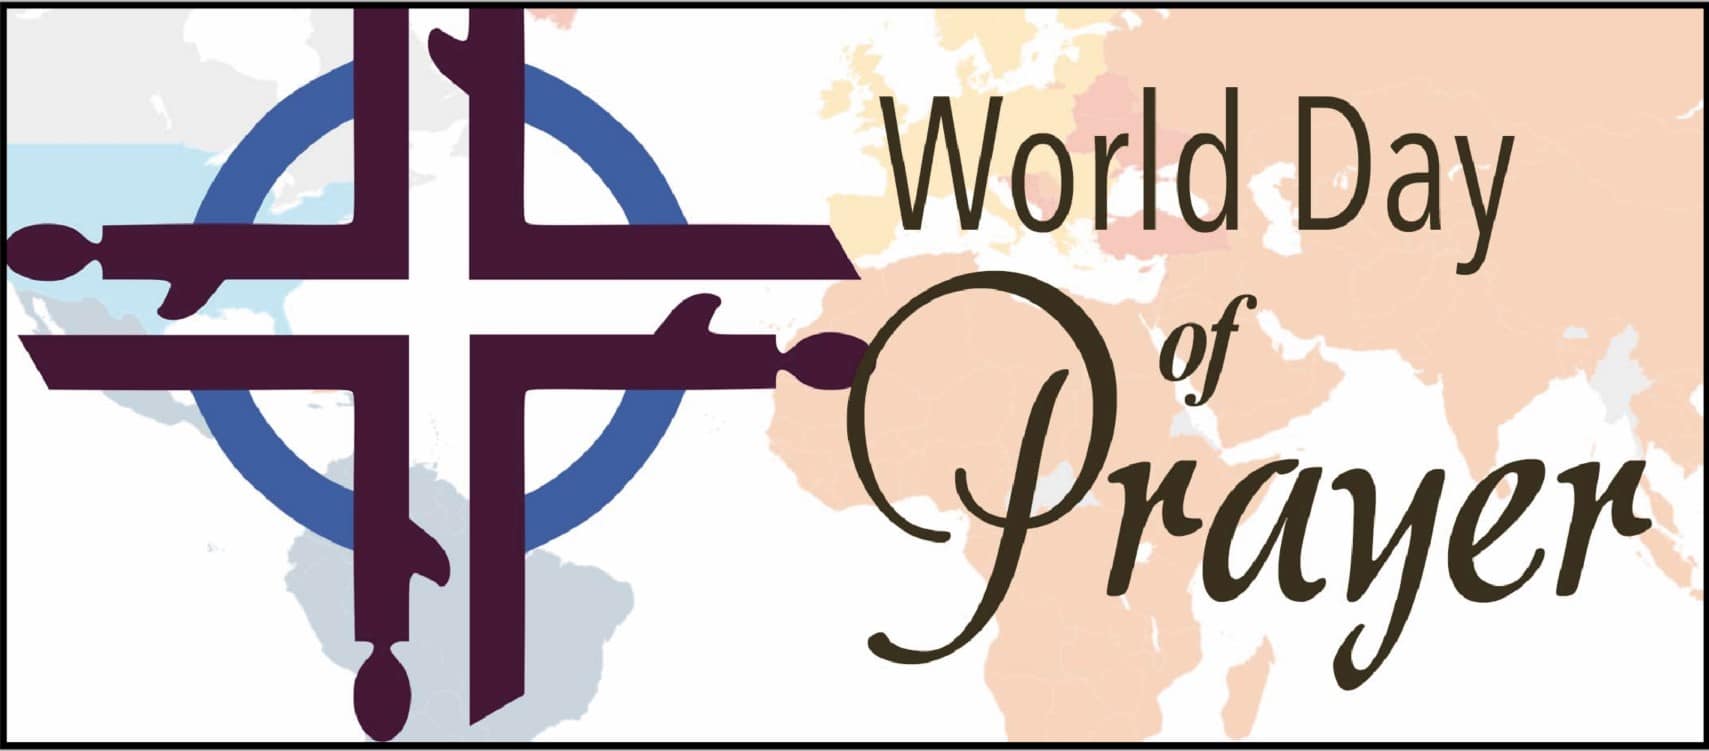 World Day of Prayer - Black Double Framed Cross with World Map Outline in the background